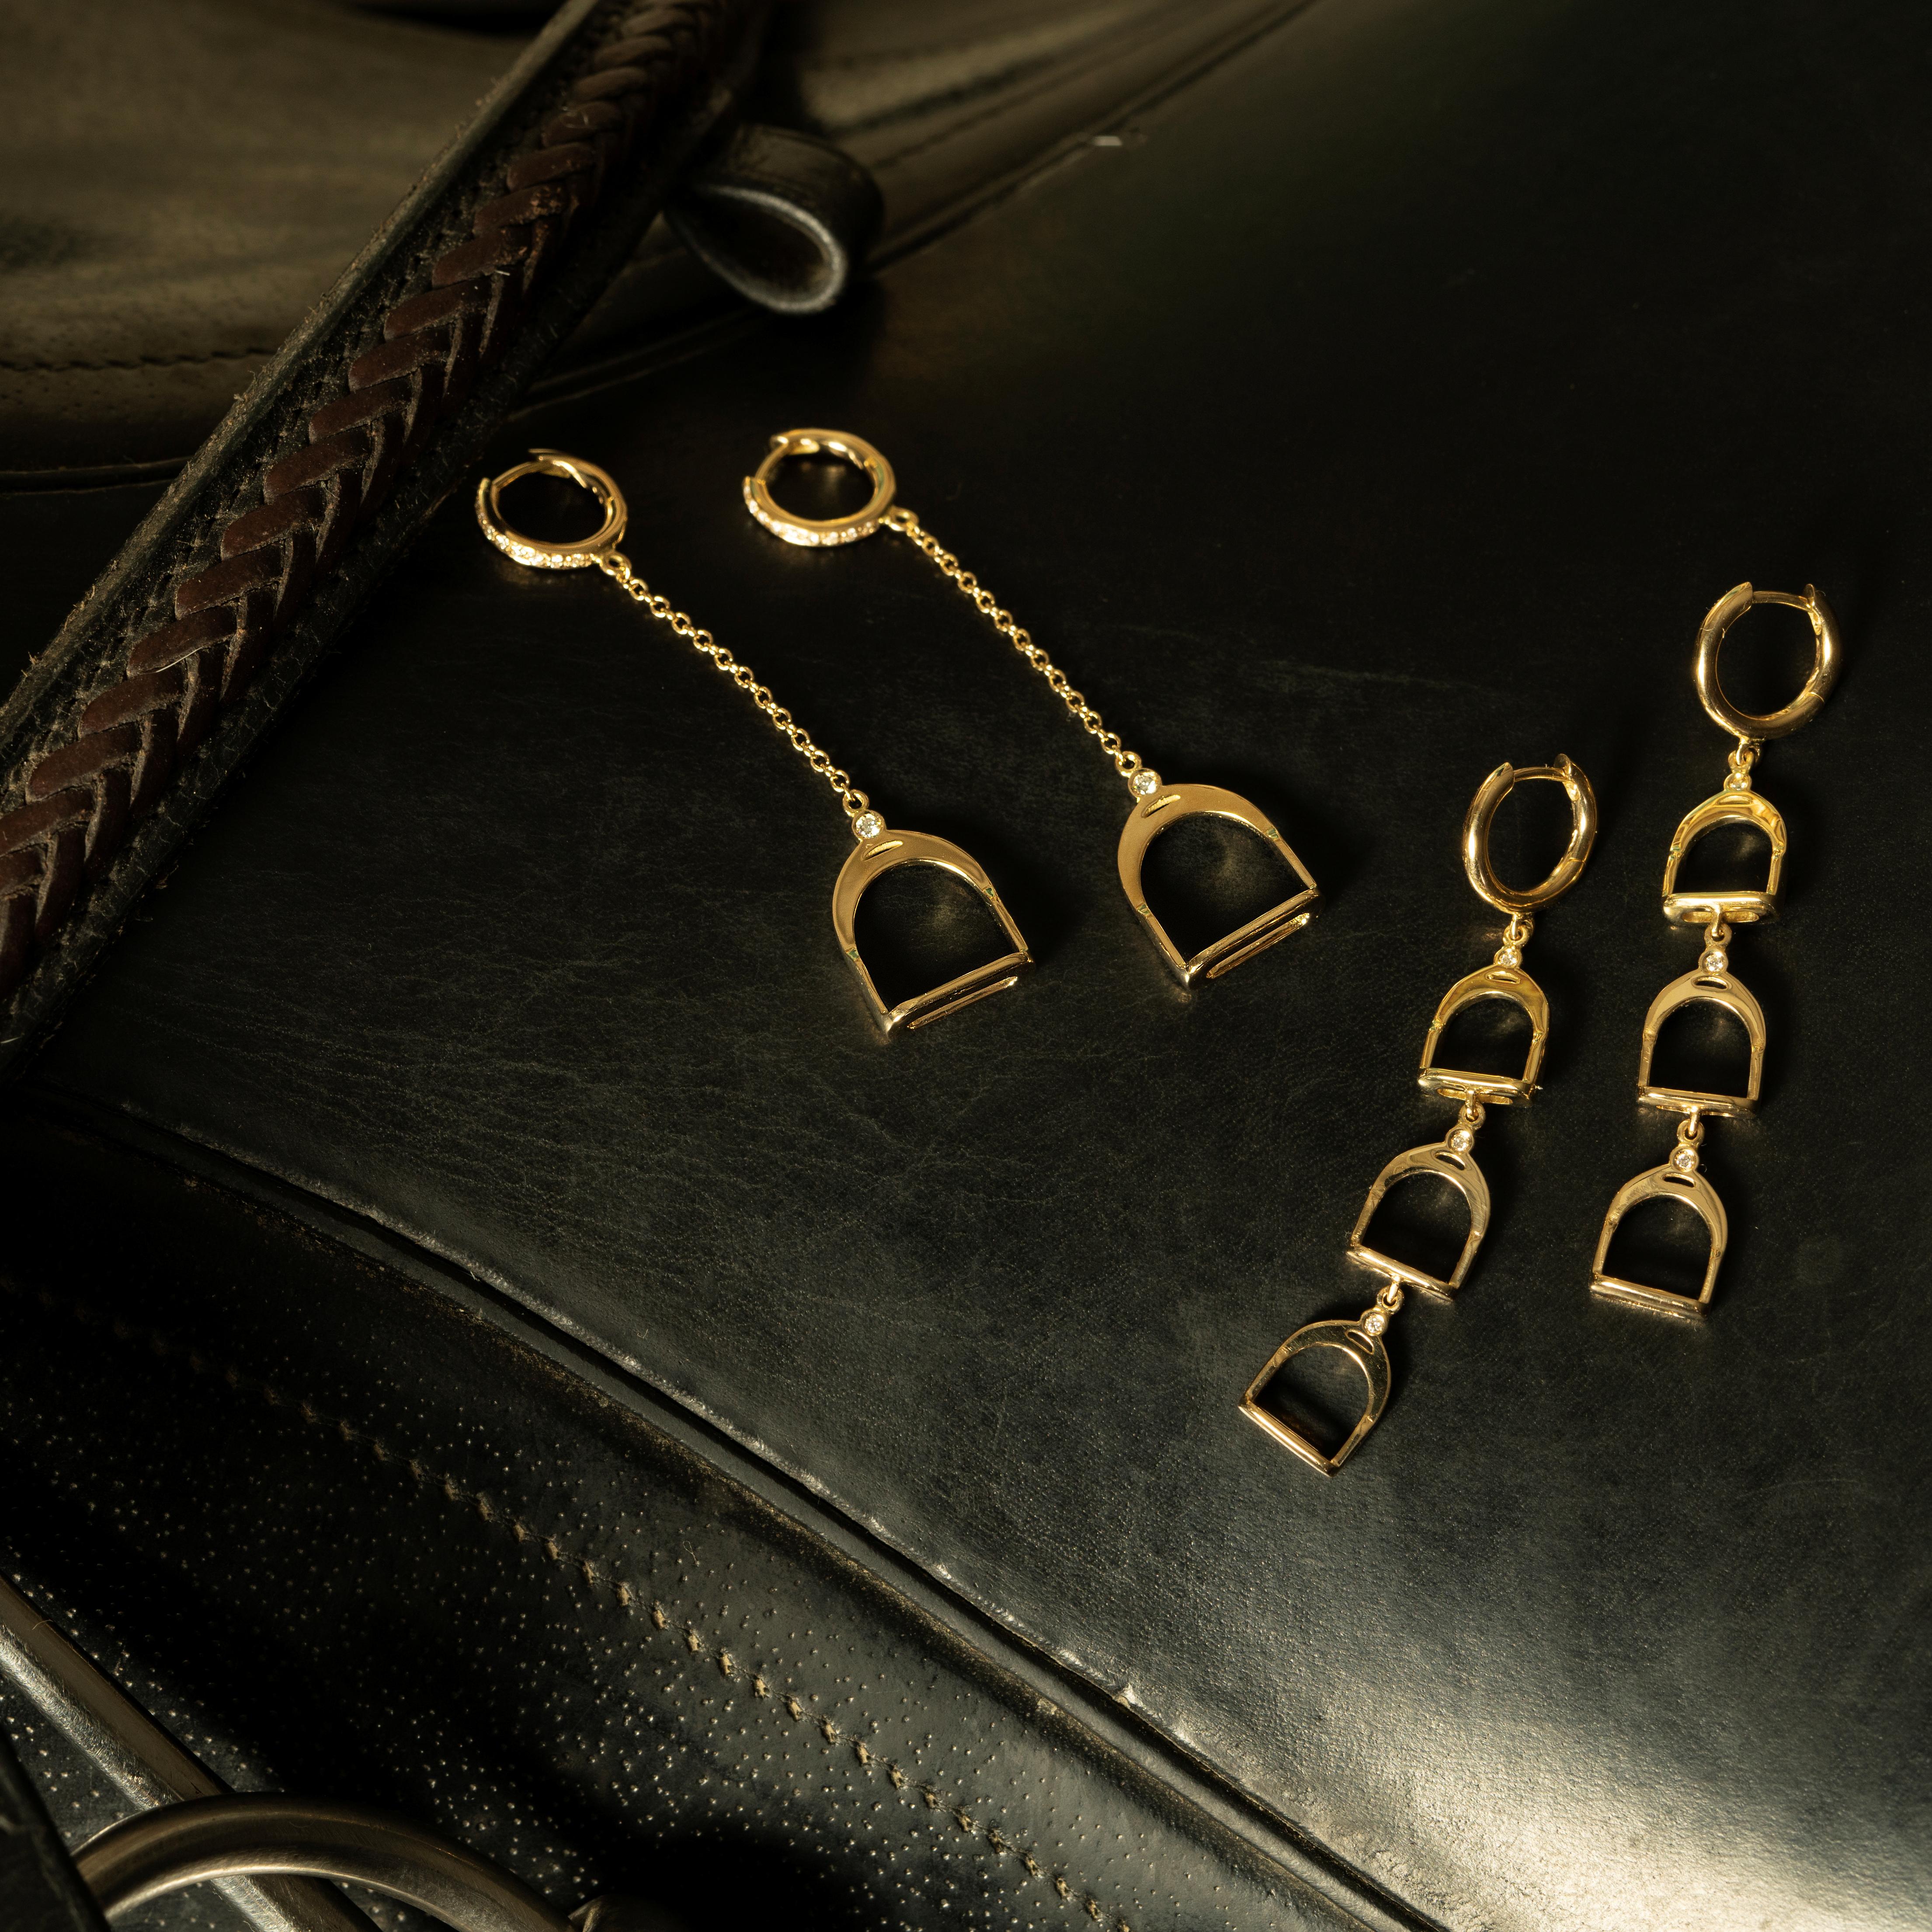 Garavelli 18 Karat Yellow Gold  Dangling Earrings from Staffe Collection, featuring brown diamonds accents. Made in Valenza, Italy
Each stirrup is 20 mm tall and have one brown diamond.
Total earrings length mm 60
18kt YELLOW GOLD  : gr